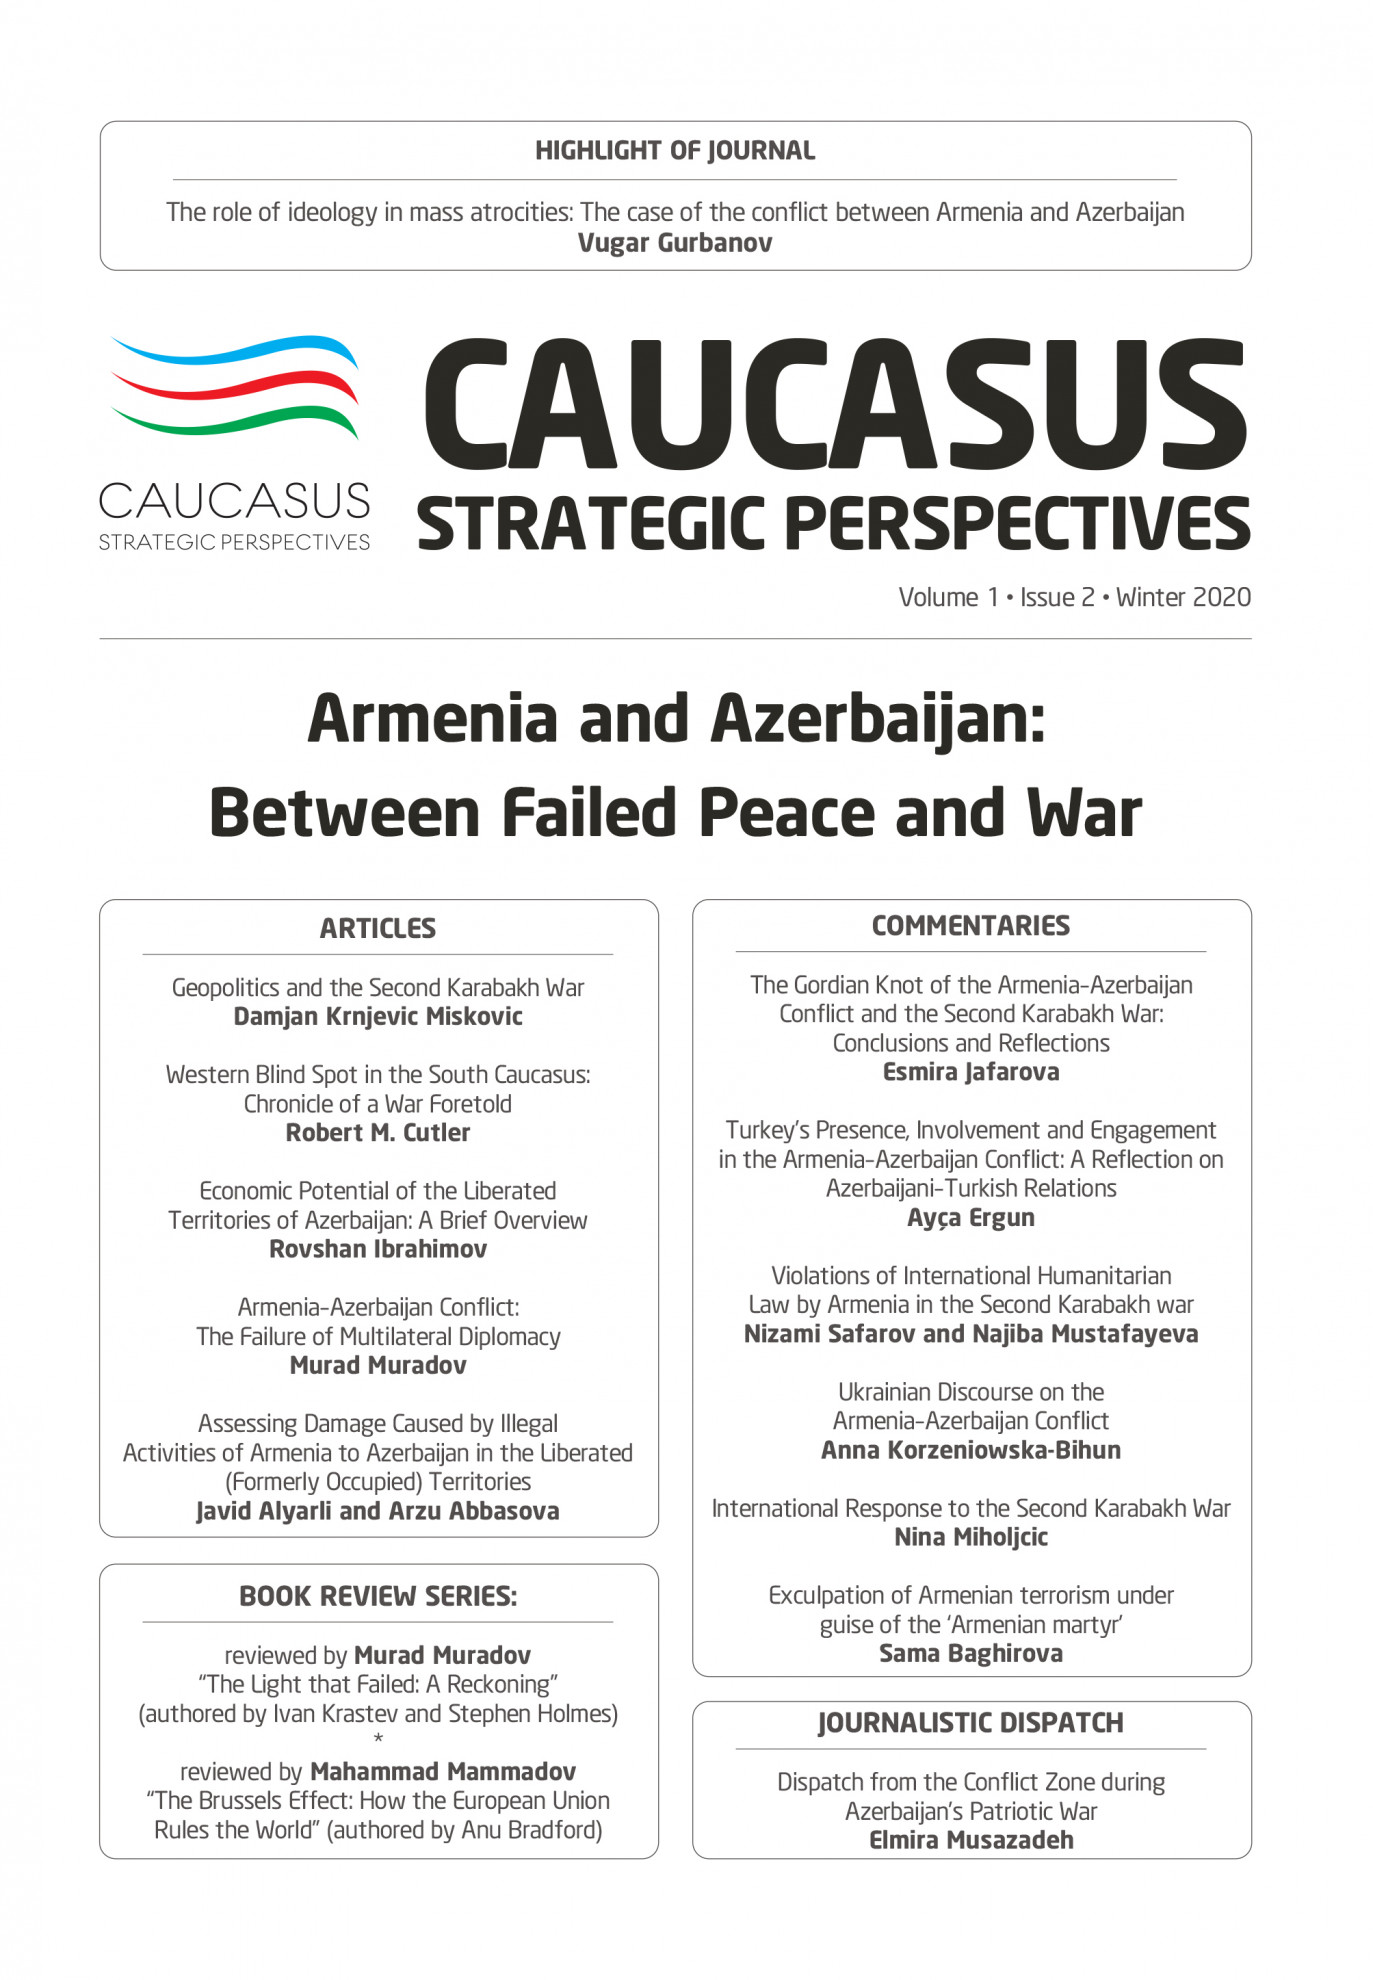 A new issue (Volume 1, Issue 2, Winter 2020) of the Journal of Caucasus Strategic Perspectives (CSP) entitled “Armenia and Azerbaijan: Between Failed Peace and War” has been released